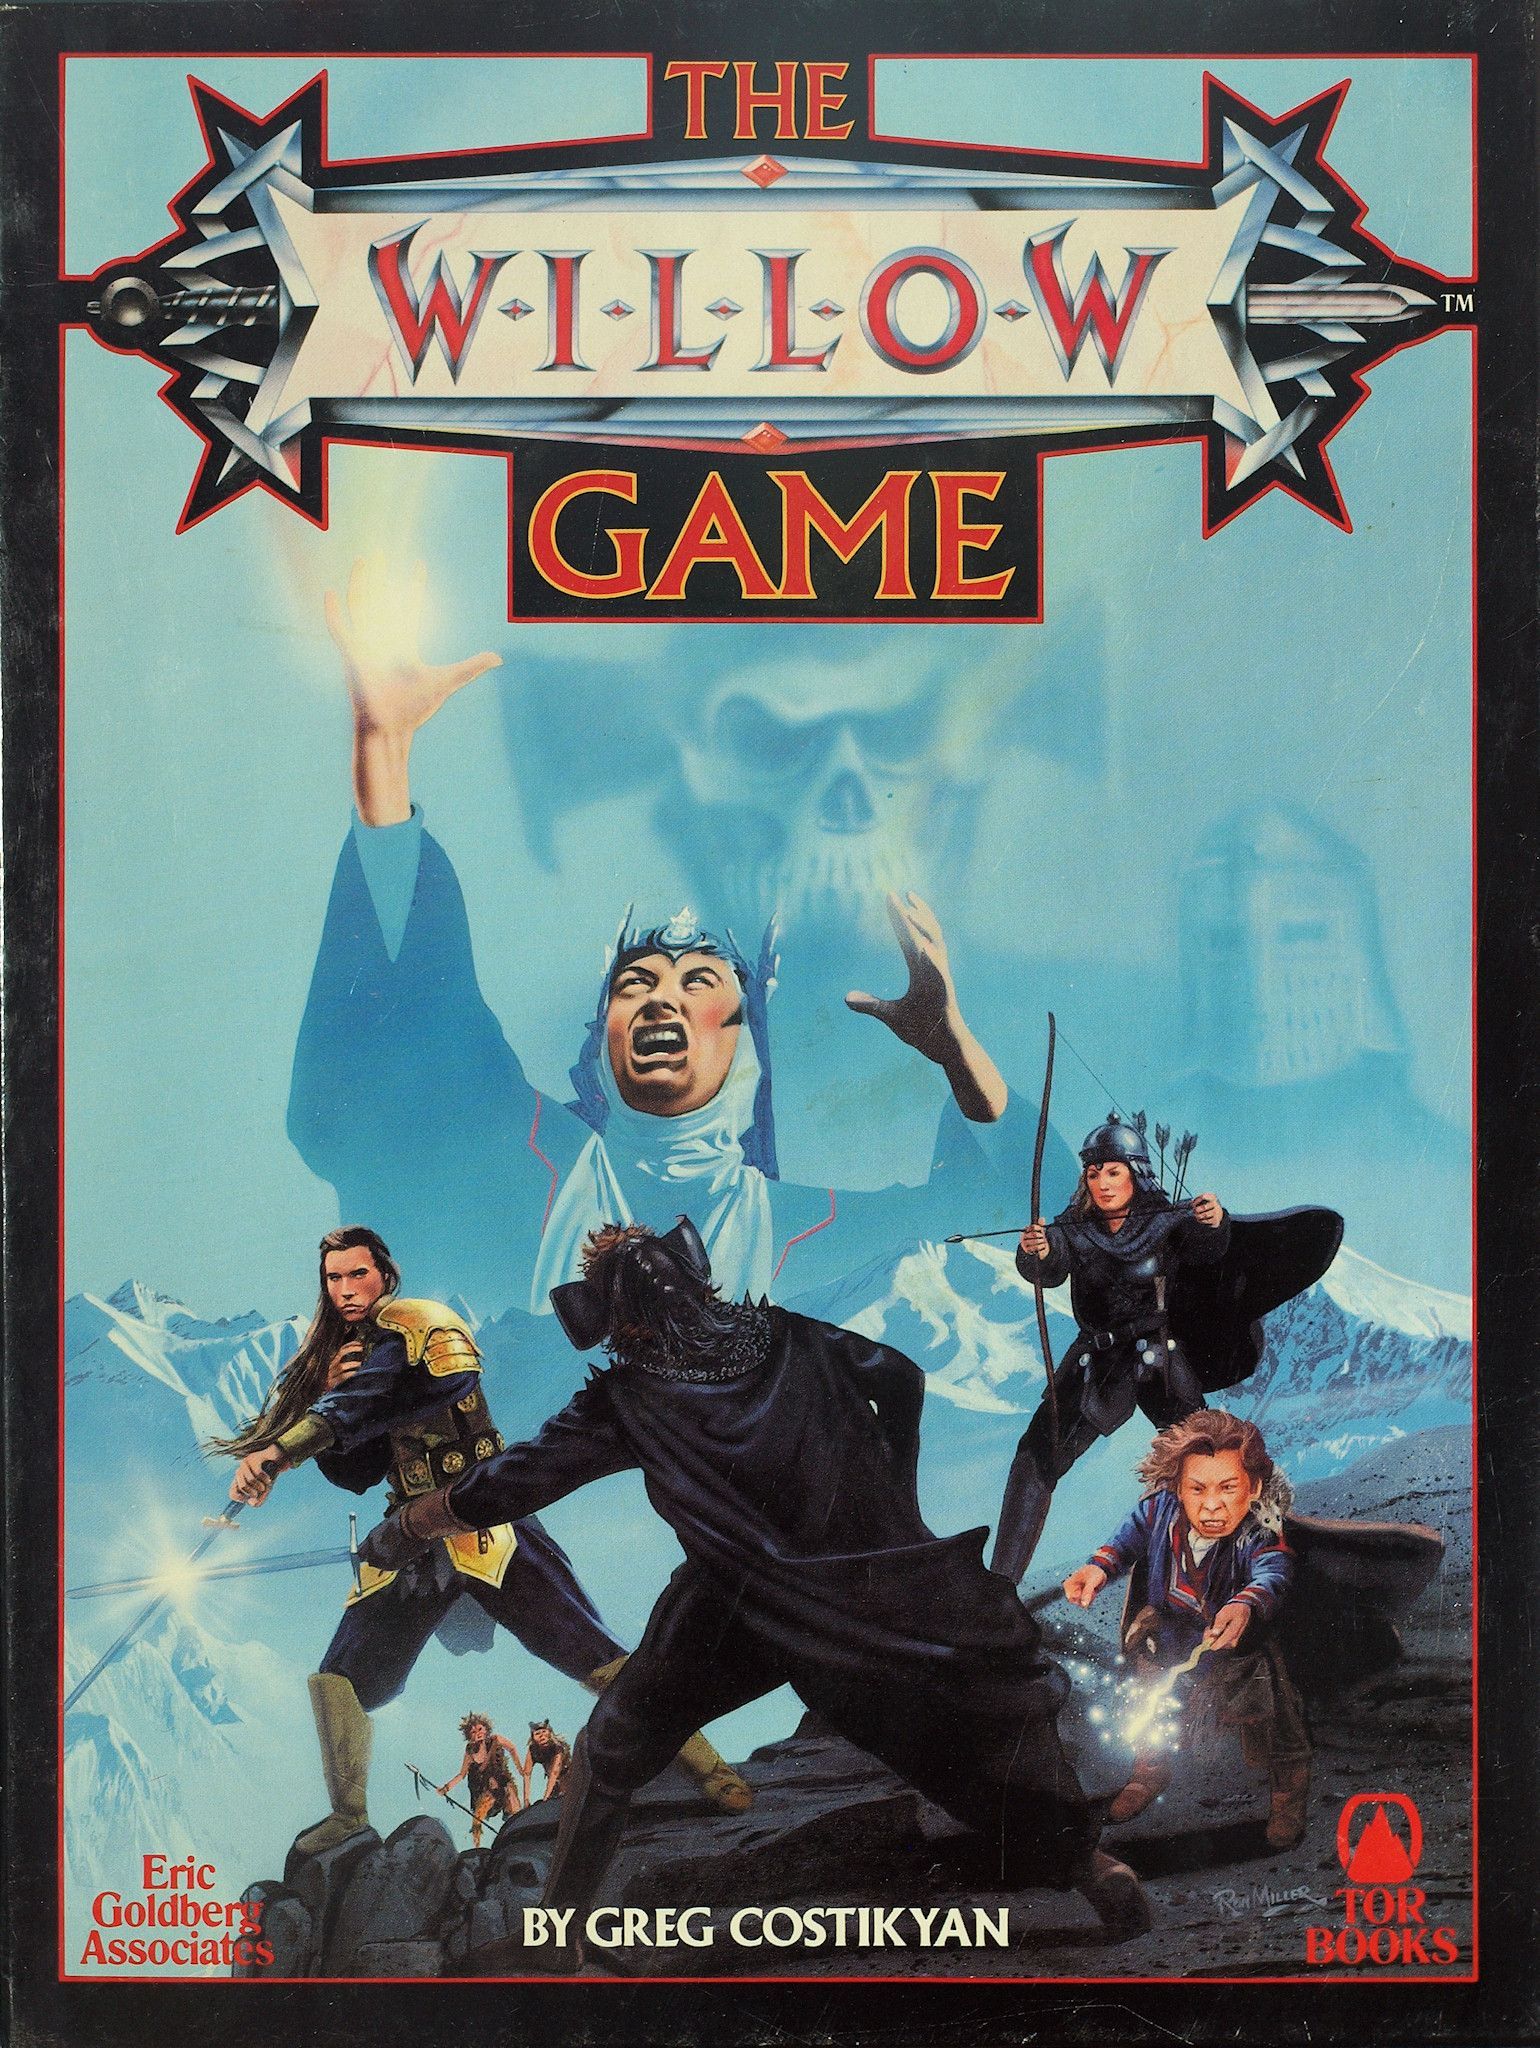 The Willow Game